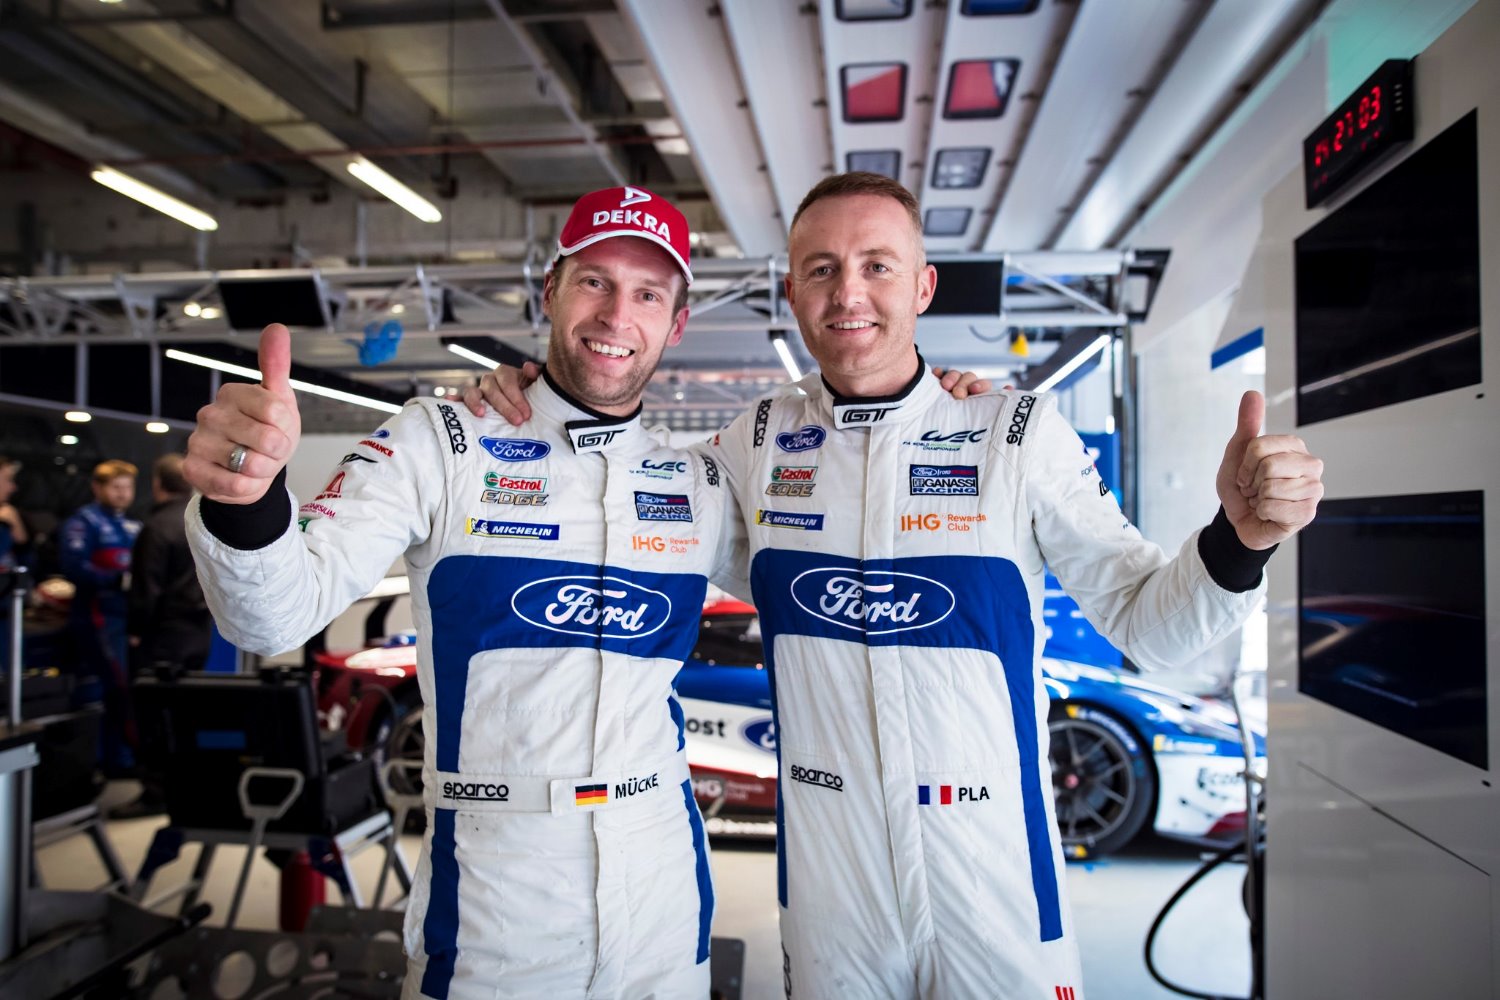 Mucke and Pla on GTE-Pro pole